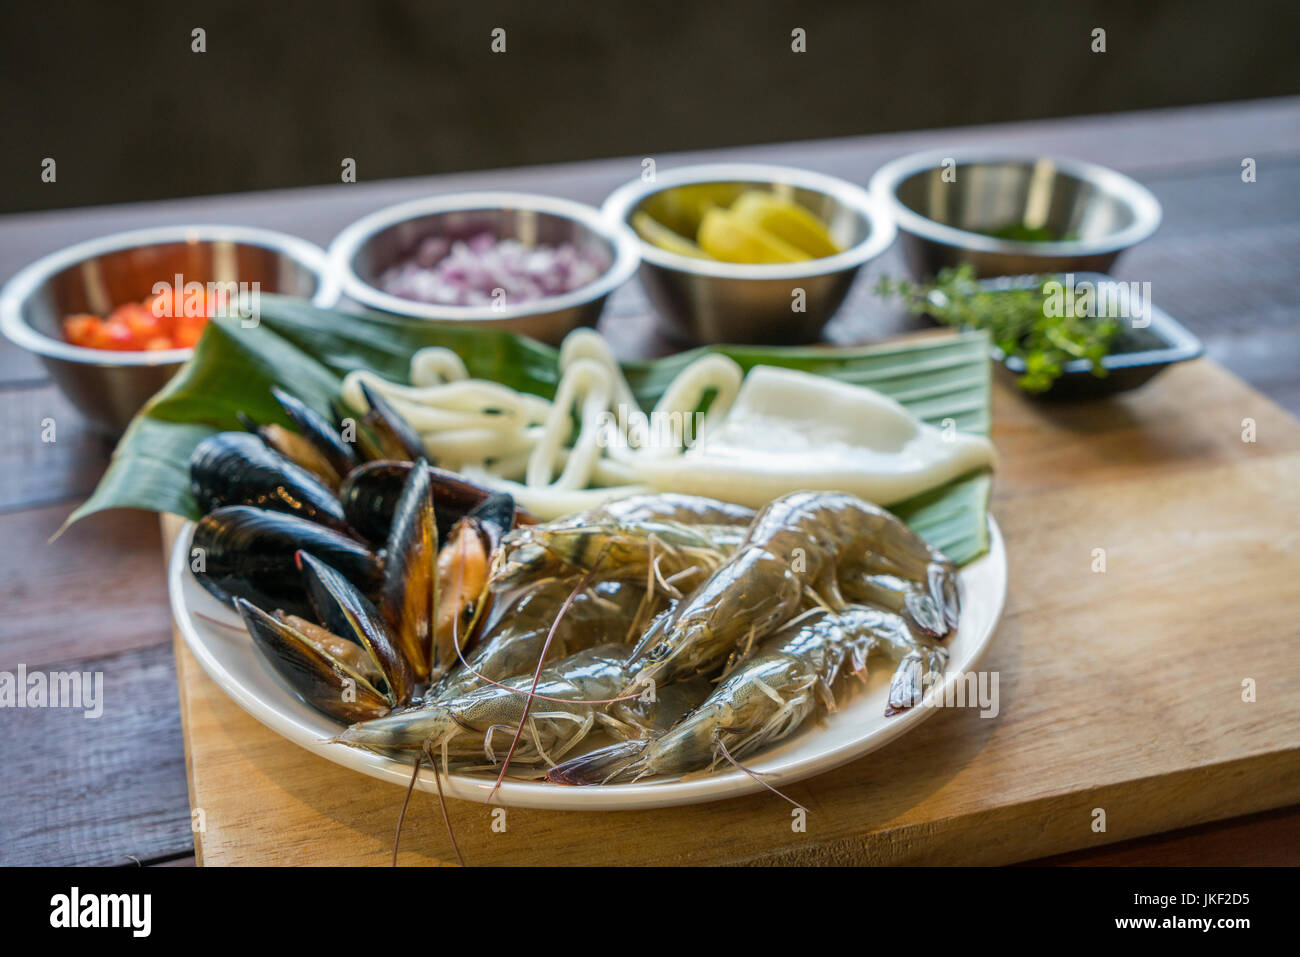 Raw seafood on plate, healthy food, prawn, clam squid. Stock Photo